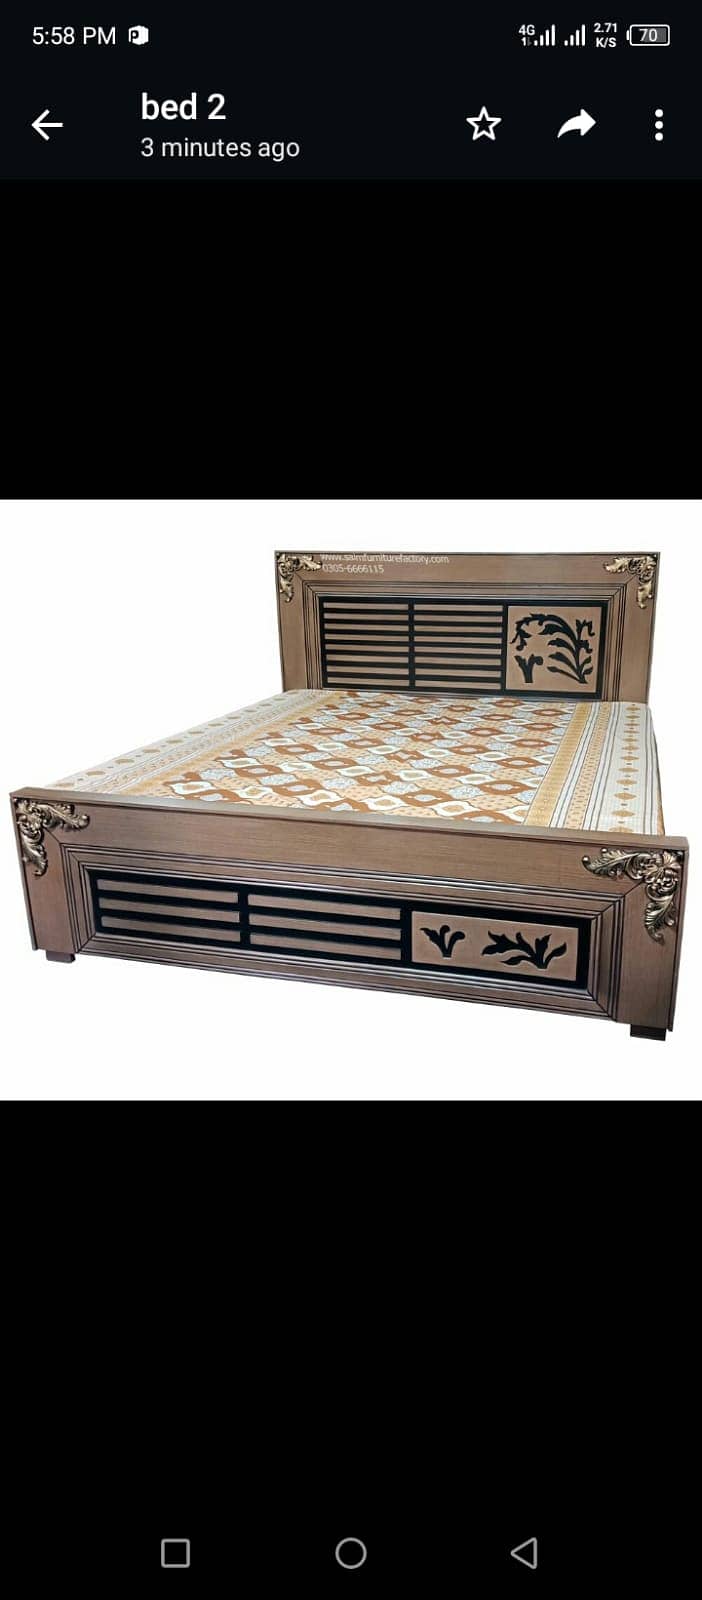 bed,double bed,king size bed,poshish bed/bed for sale,furniture 2